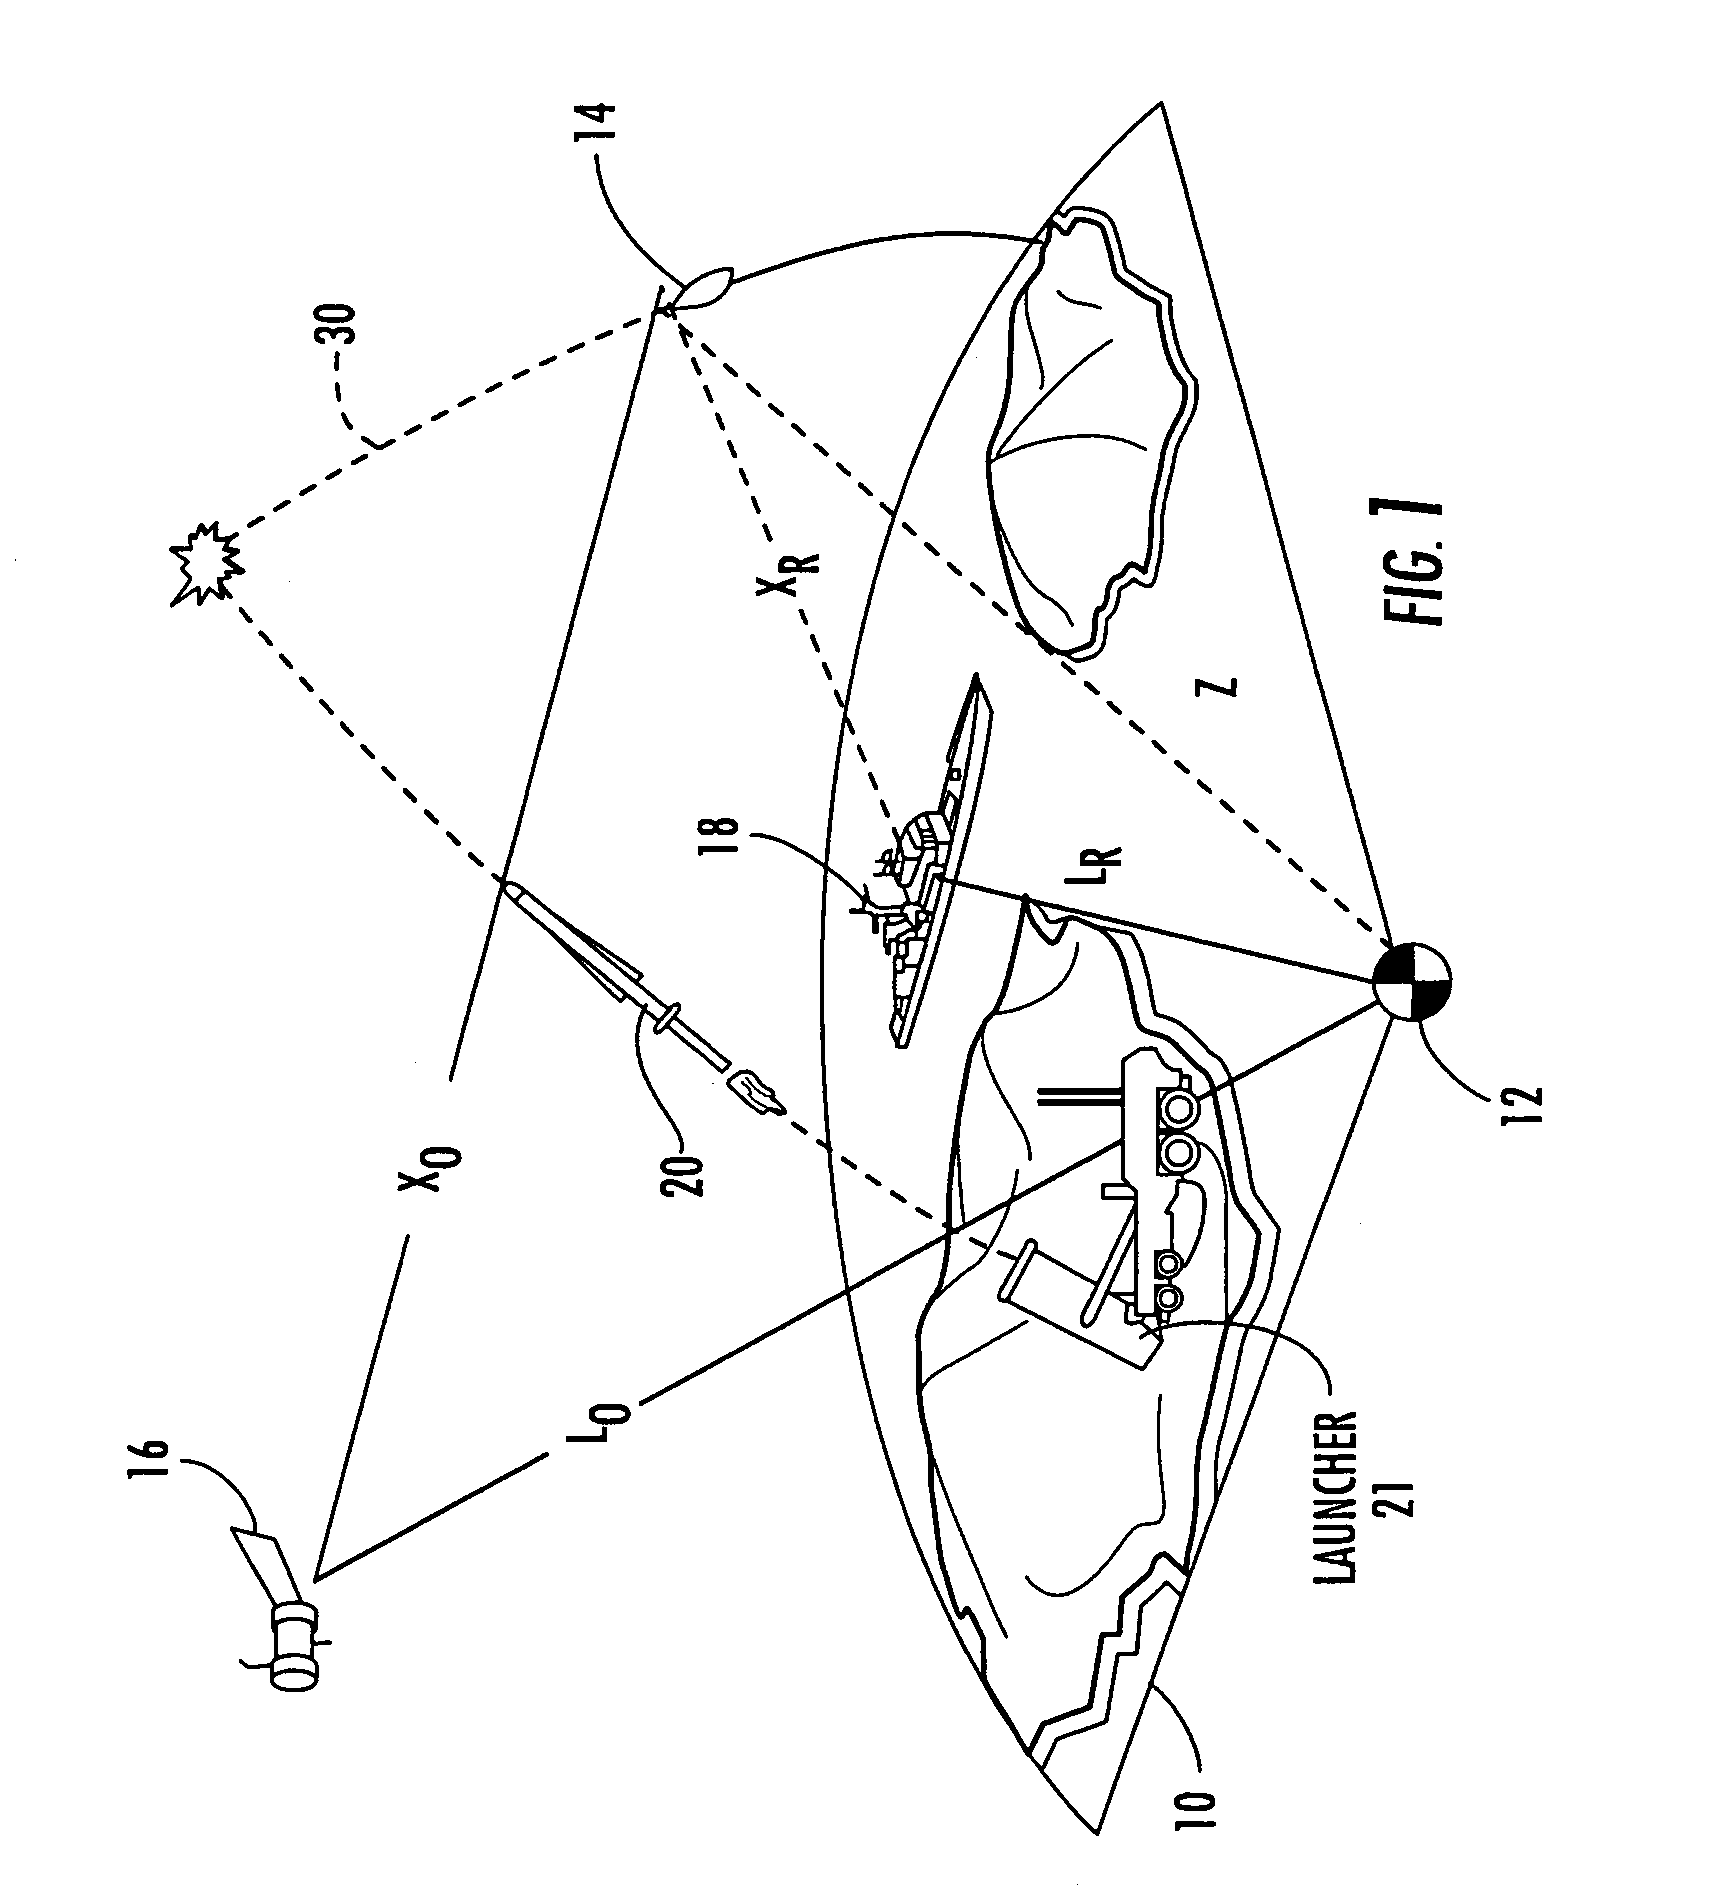 Missile identification and tracking system and method